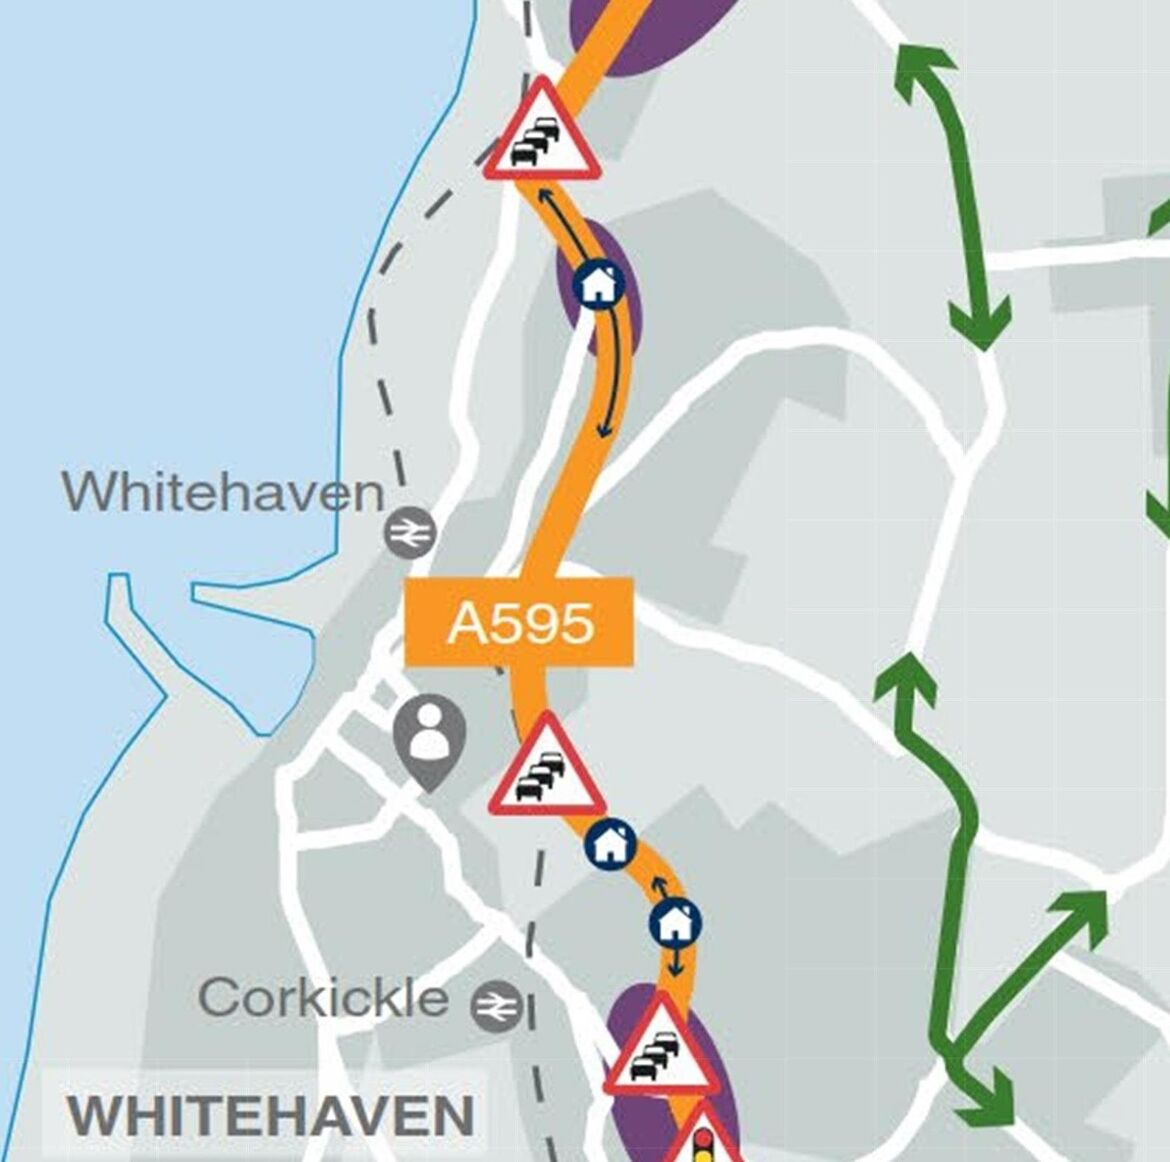 Design options for A595 in Whitehaven, UK